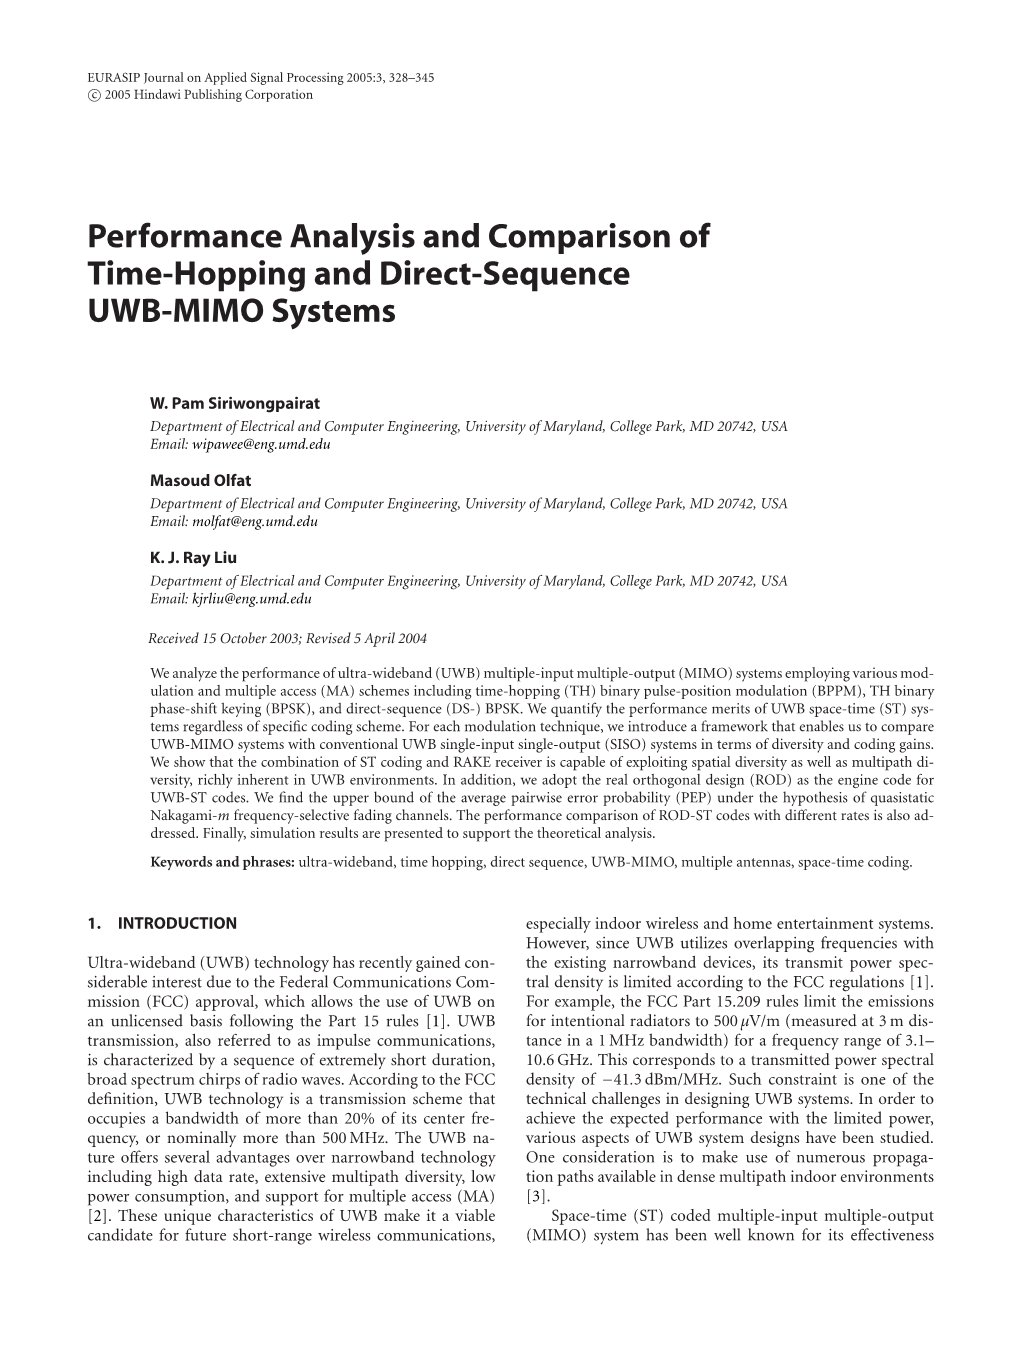 Performance Analysis and Comparison of Time-Hopping and Direct-Sequence UWB-MIMO Systems